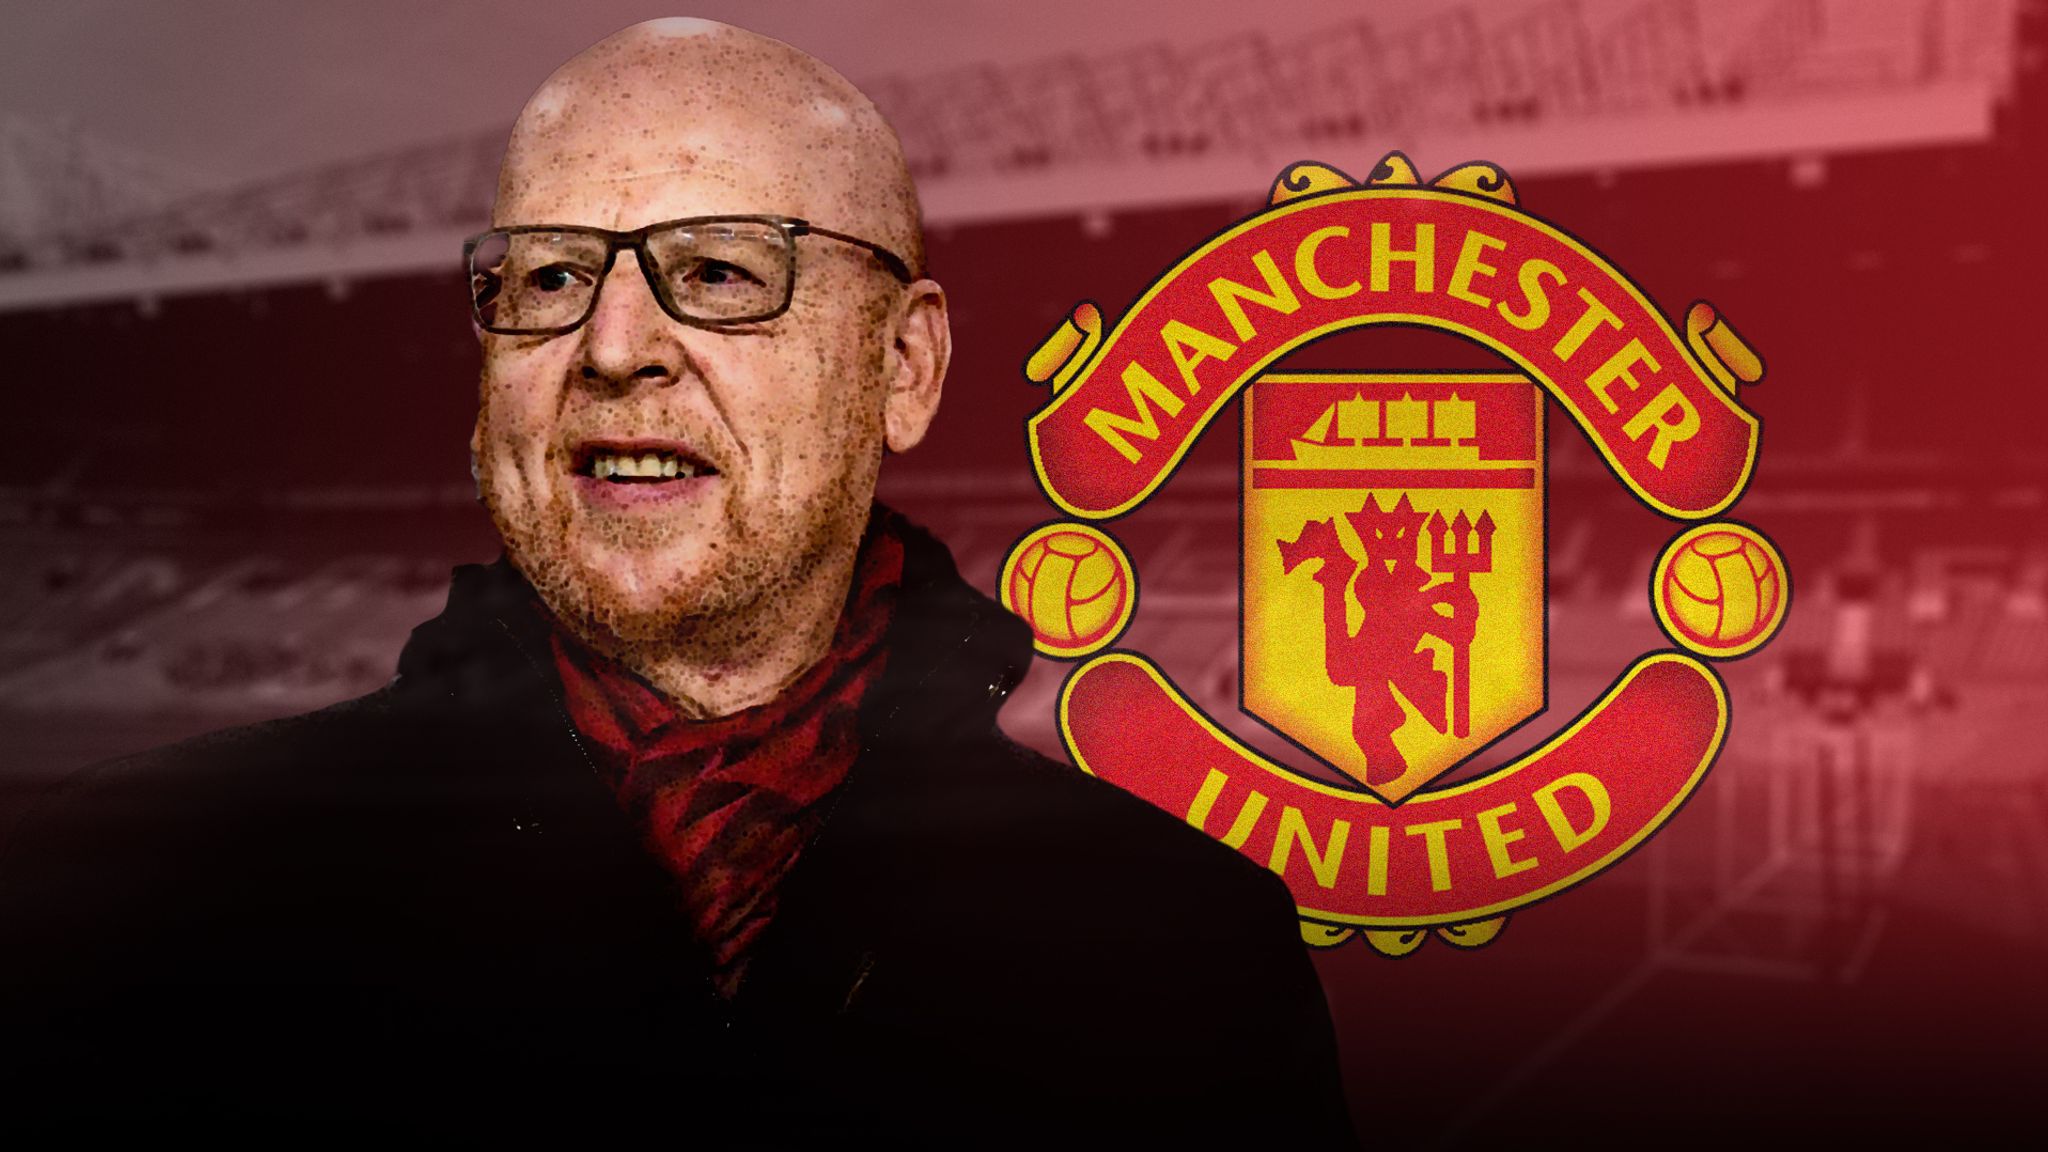 A short history of Manchester United's ownership